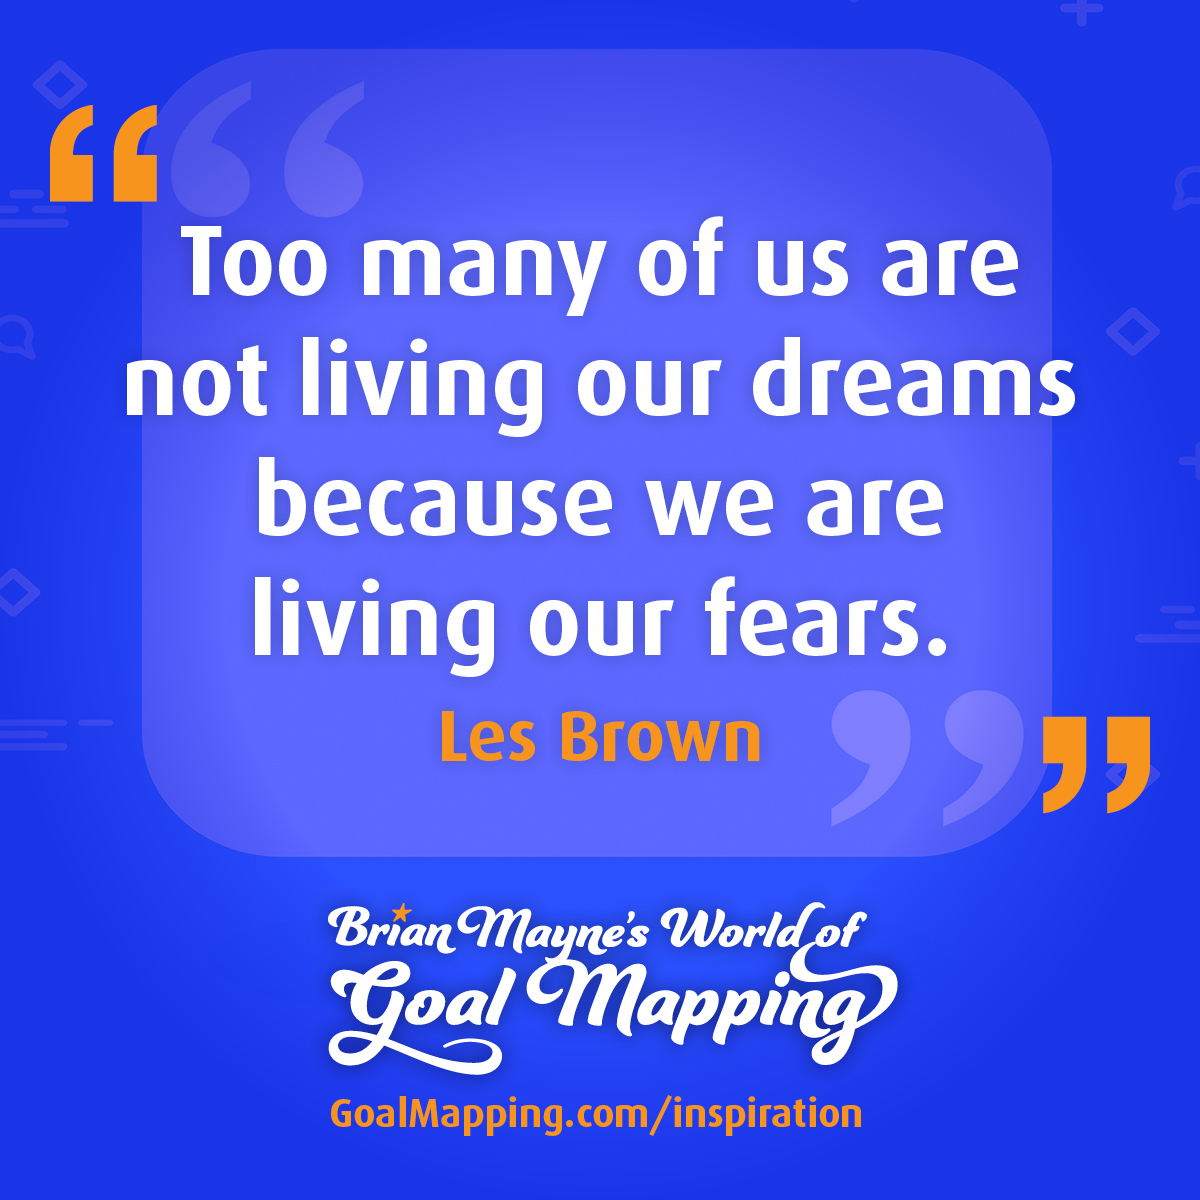 "Too many of us are not living our dreams because we are living our fears." Les Brown